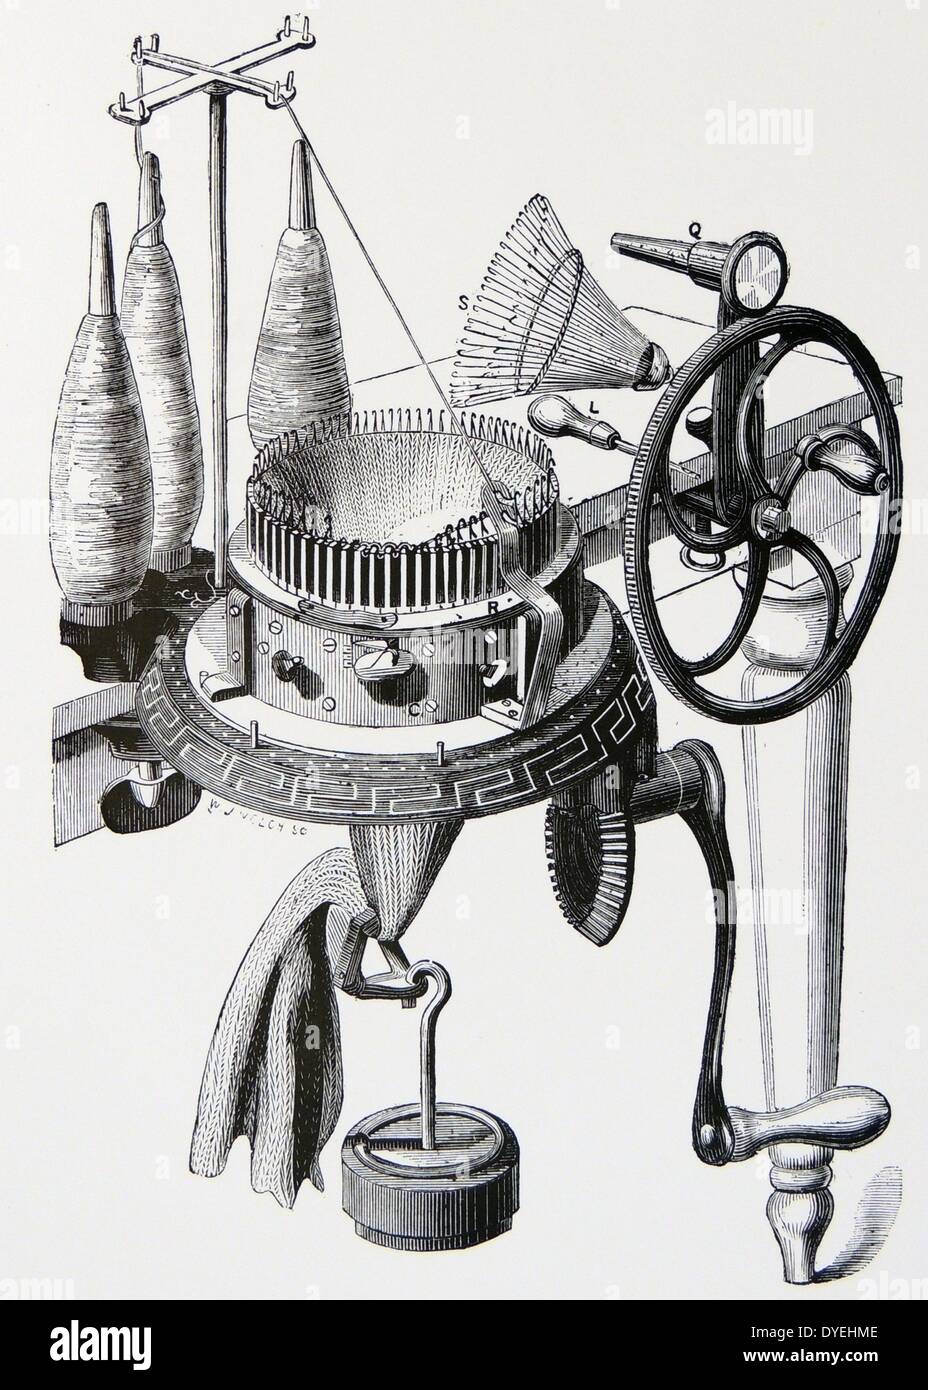 The ''Little Rapid'' home knitting machine which created at tubular web, introduced into Britain in 1871.  Engraving, London, 1872. Stock Photo